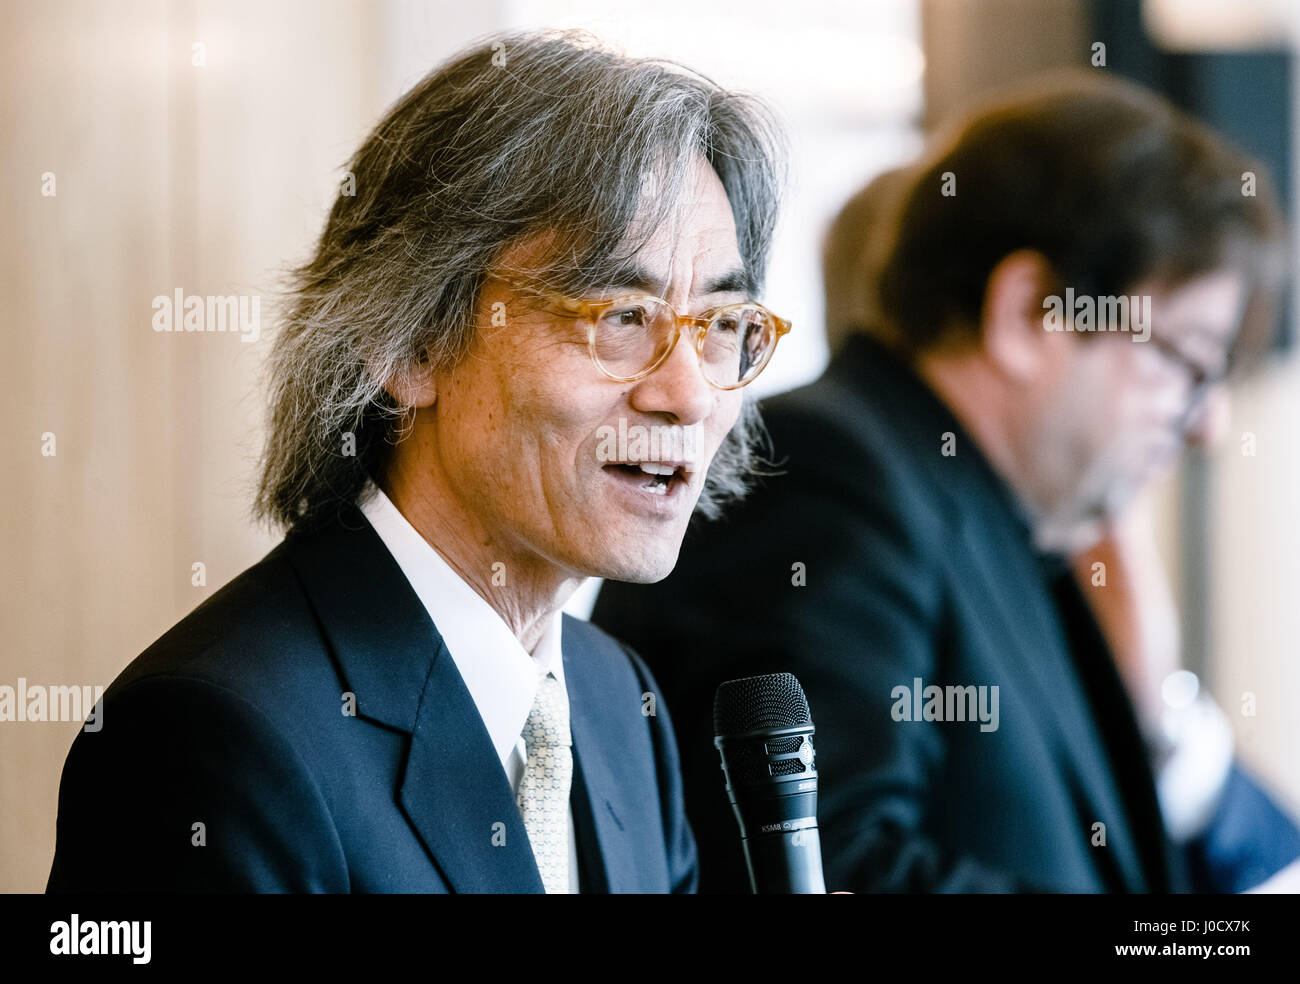 Hamburg, Germany. 11th Apr, 2017. Kent Nagano, the general musical director and head director of the Philharmonic State Orchestra, talks about his projects in the Hamburg State Opera's 2017/18 season. Photo: Markus Scholz/dpa/Alamy Live News Stock Photo